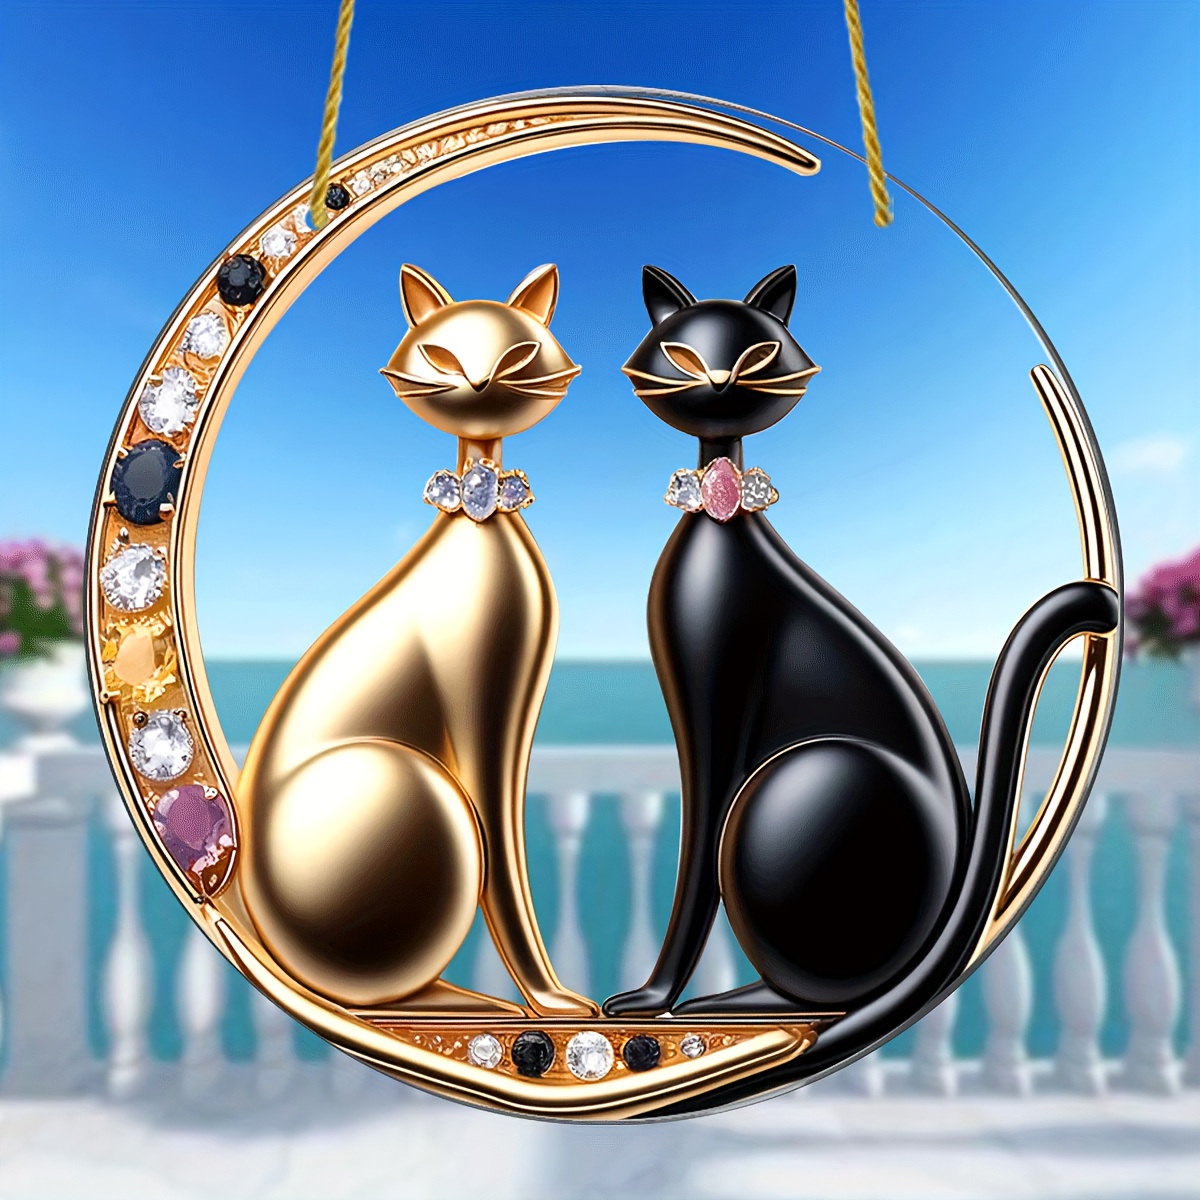 

Charming Black & White Cat Acrylic Suncatcher - Perfect Gift For Cat Lovers, Ideal For Outdoor, Garden, And Home Decor (8''x8'')